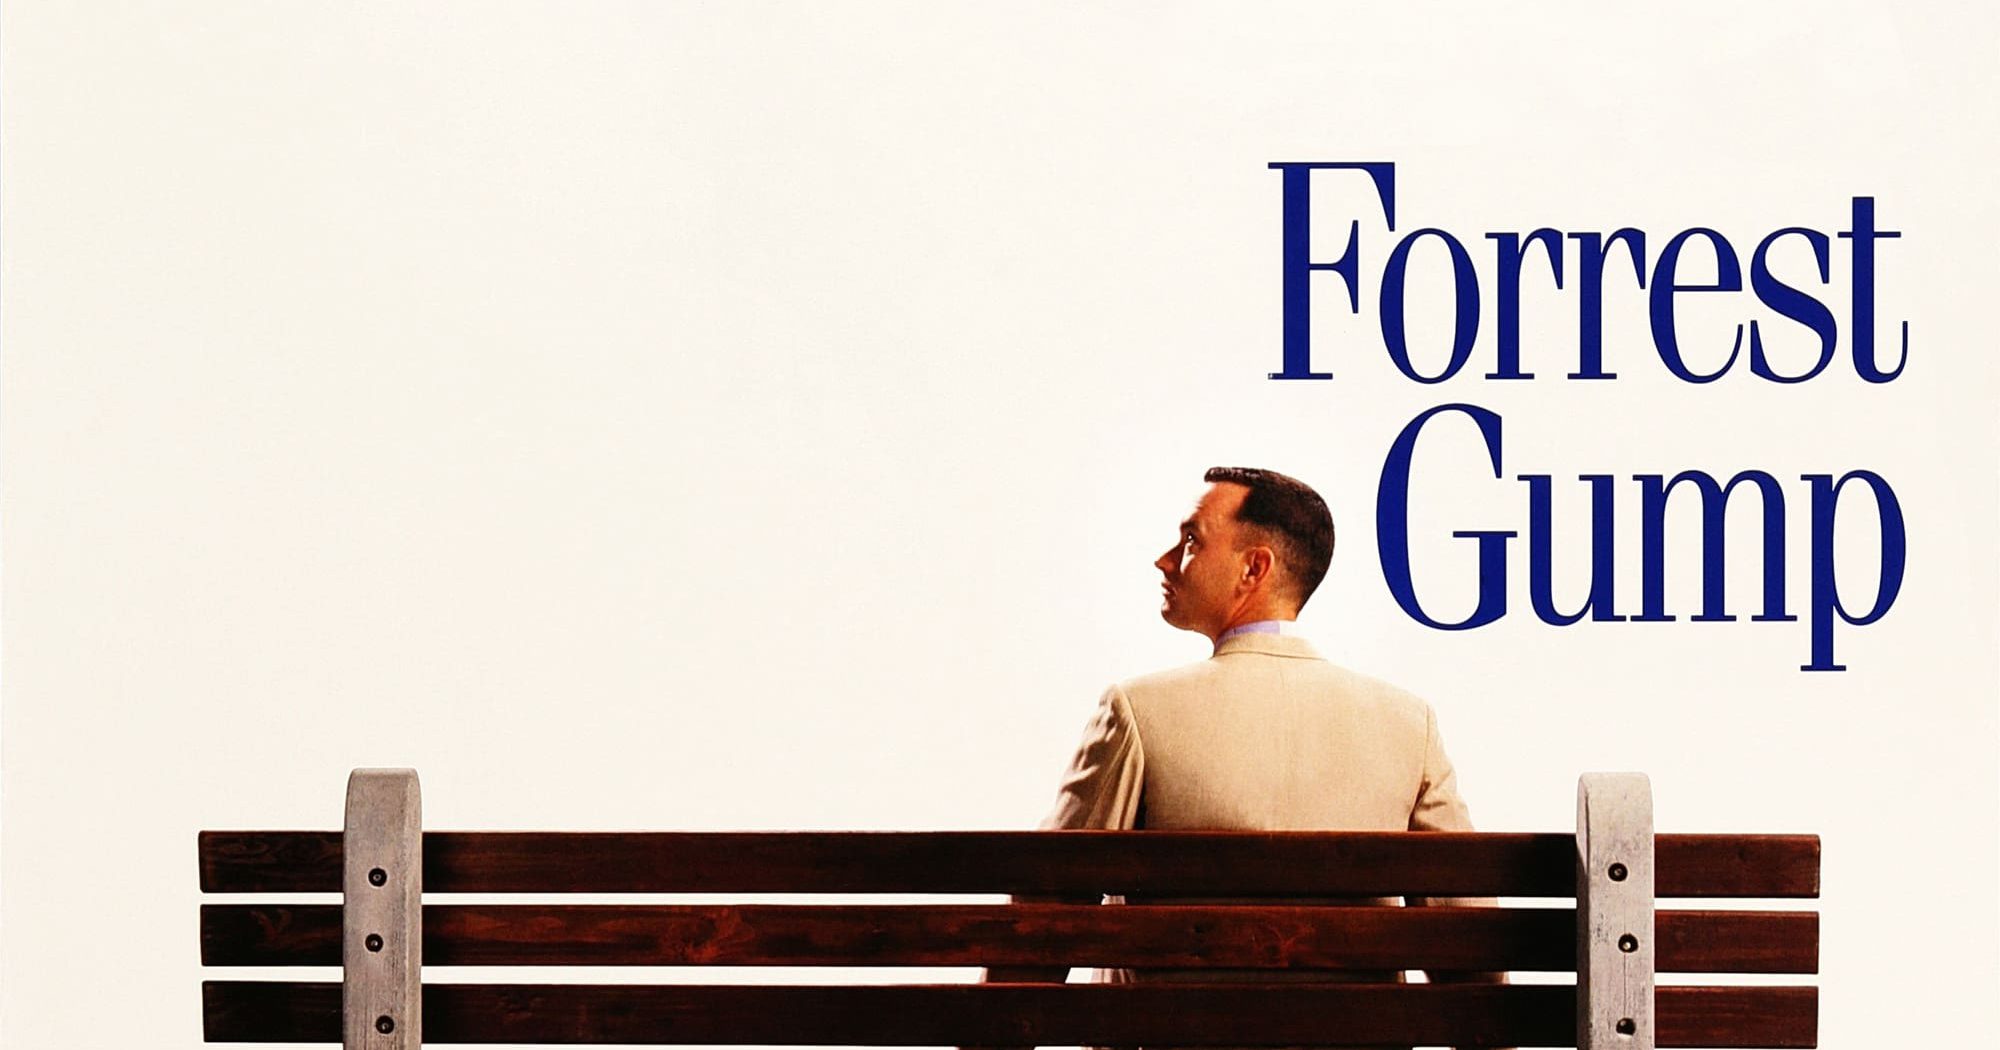 Poster for the movie "Forrest Gump"